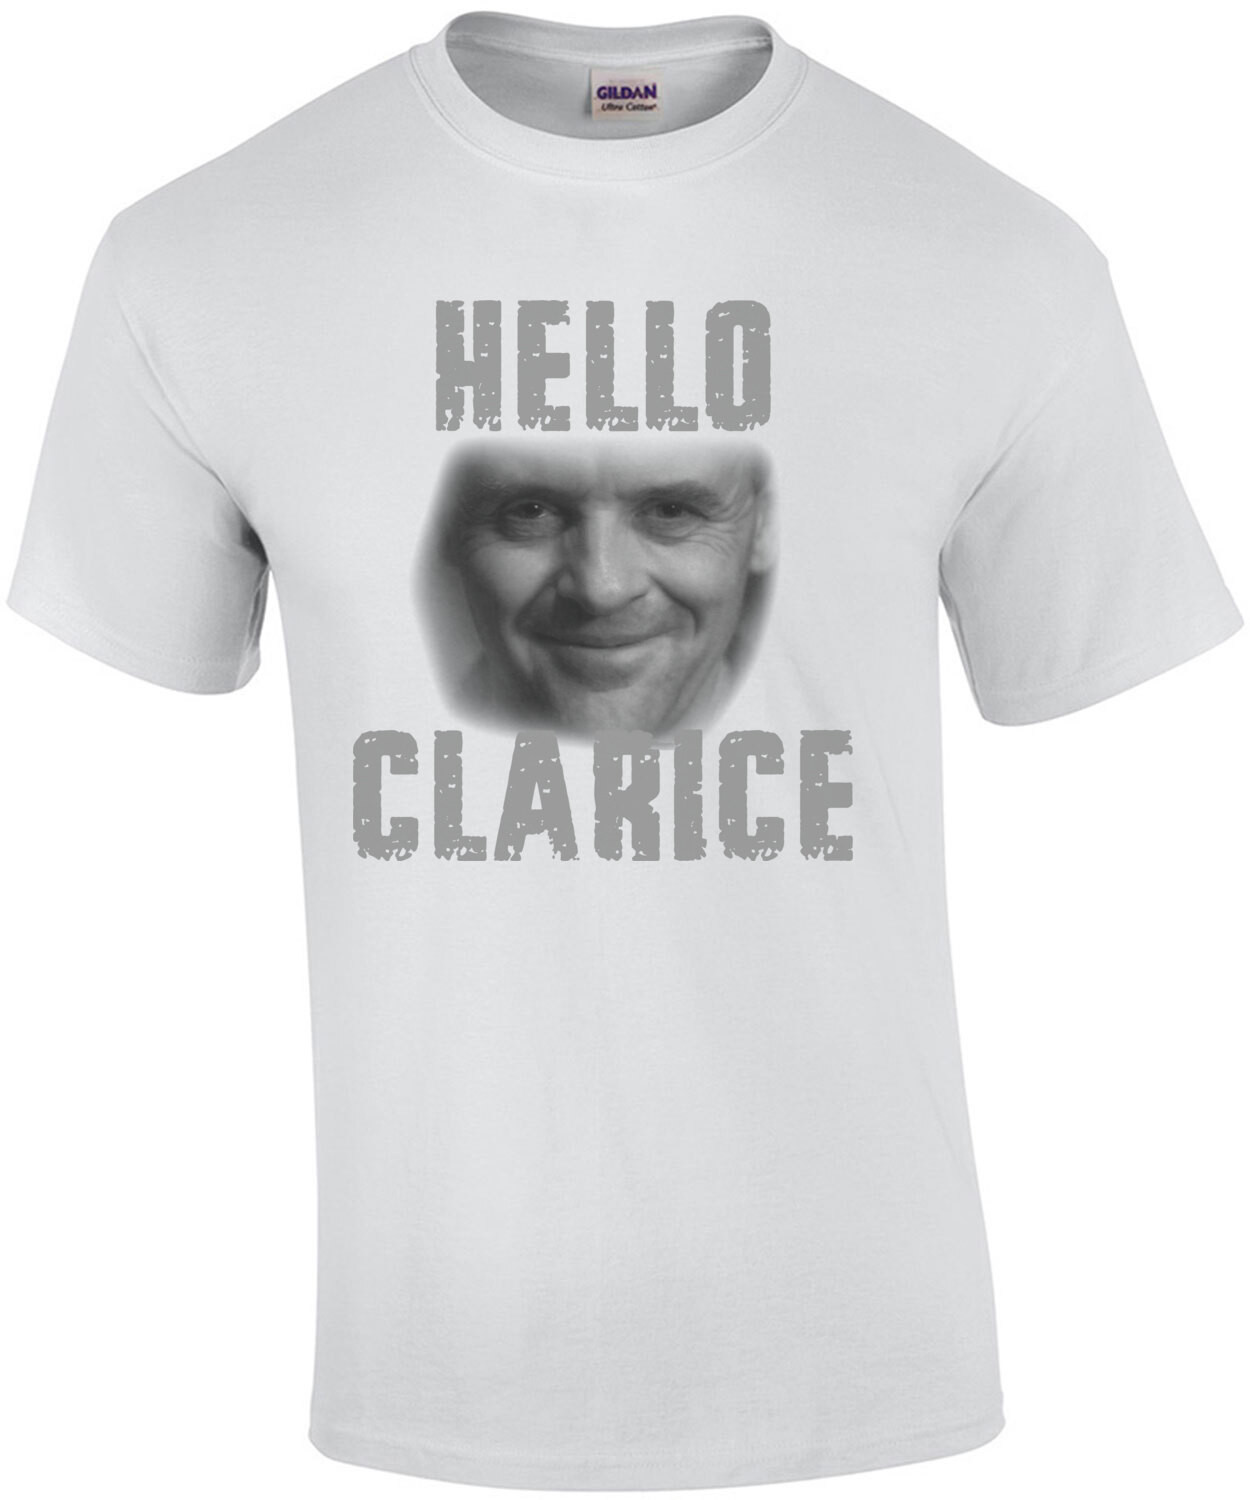 Hello Clarice - Silence of the Lambs - Hannibal Lecter - 90's T-Shirt